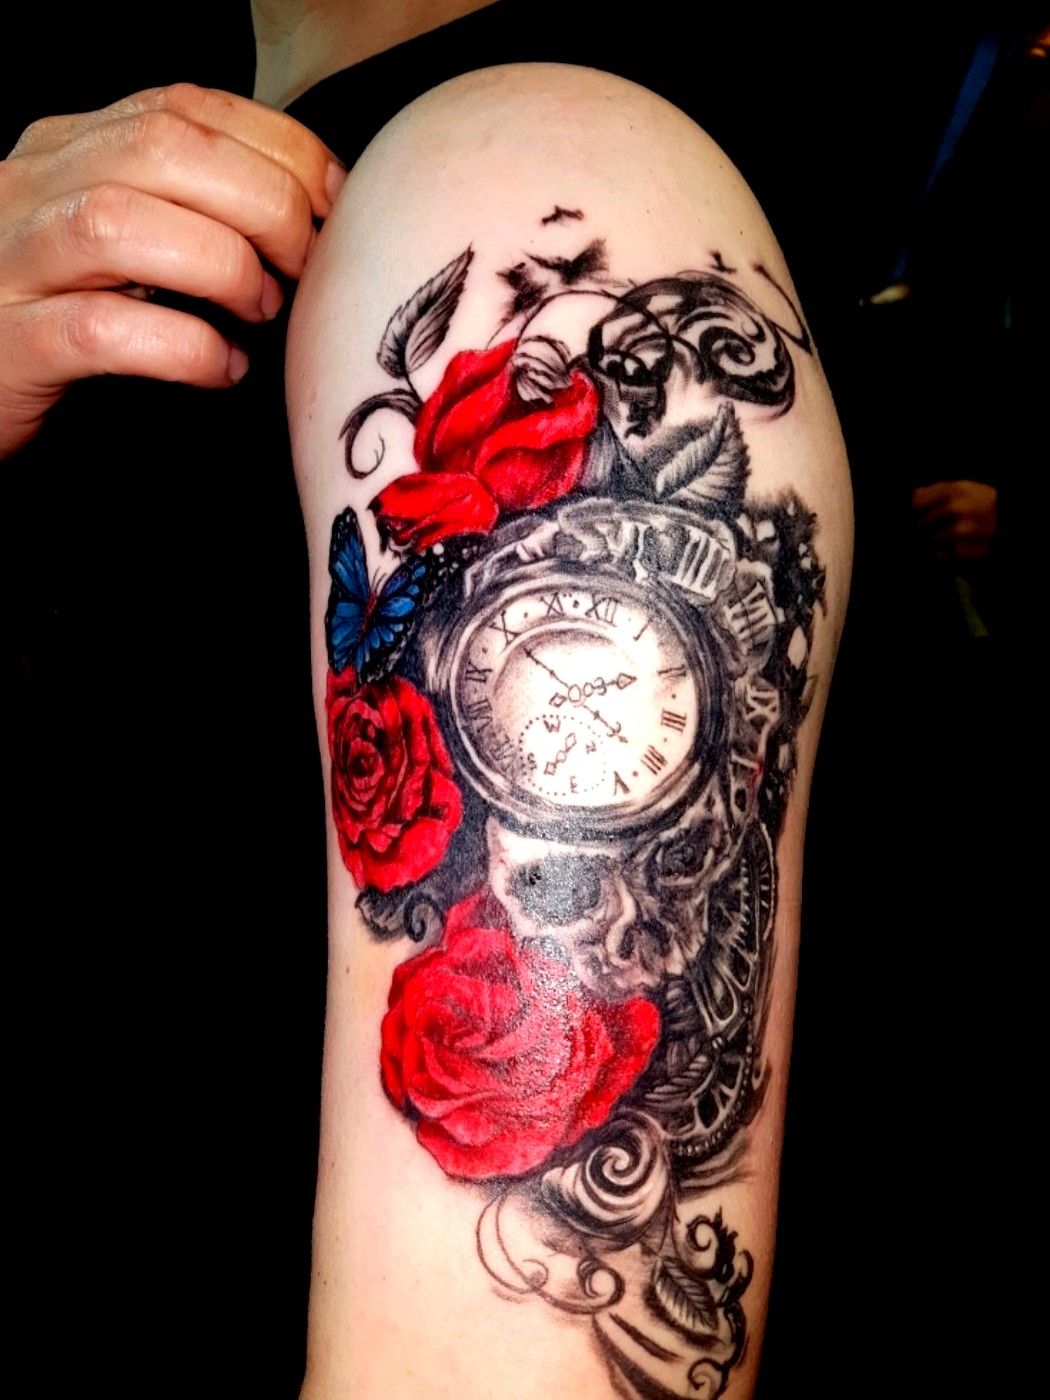 Tattoo uploaded by Melladdiction  butterfly butterflytattoo clockwork  clocktattoo clock  Tattoodo